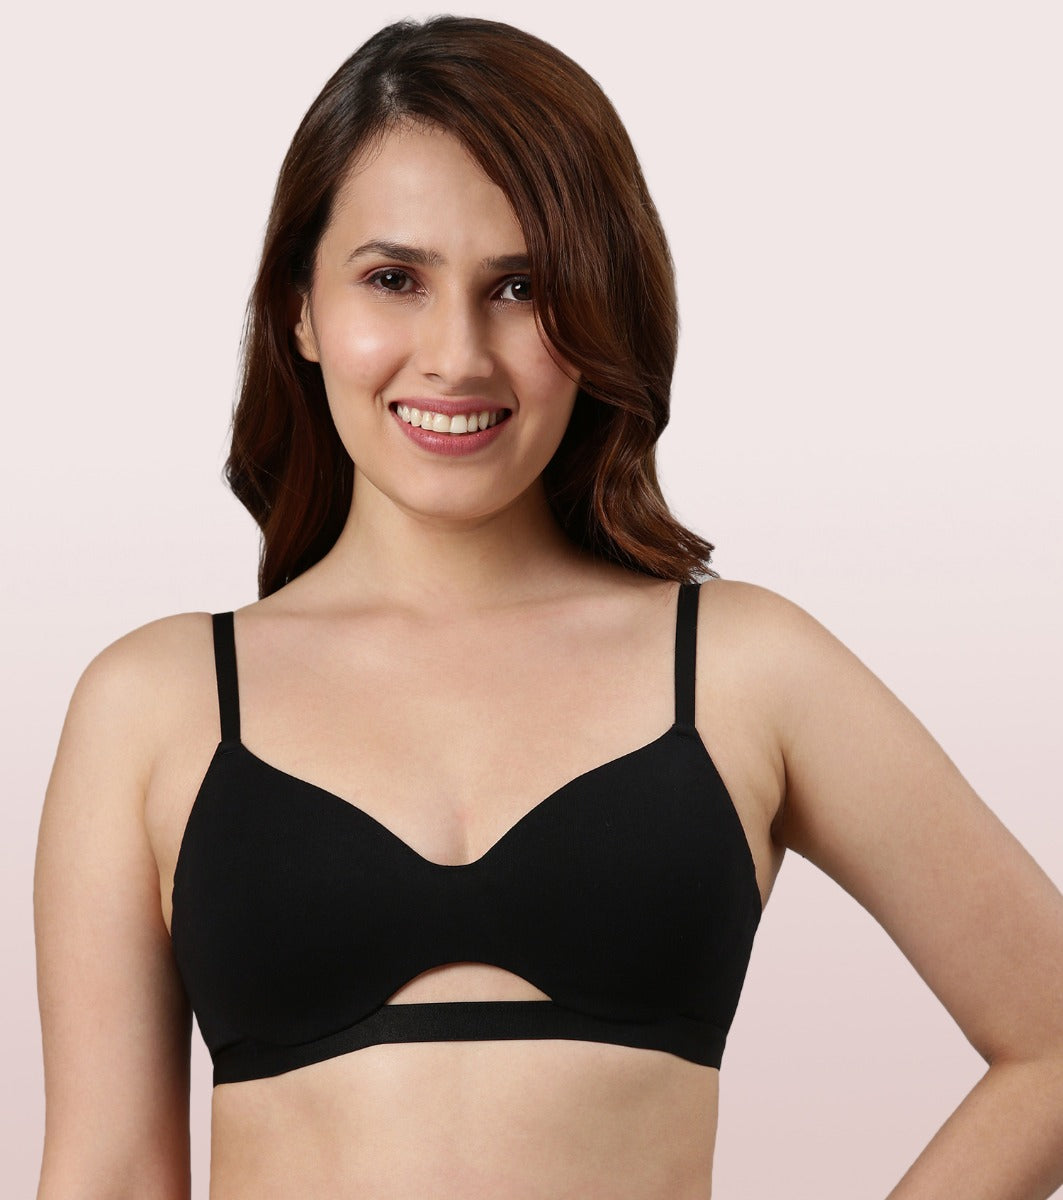 Enamor CloudSoft A032 Invisible Neckline Cotton T-shirt Bra for Women- Medium Coverage, Padded and Wirefree - Black